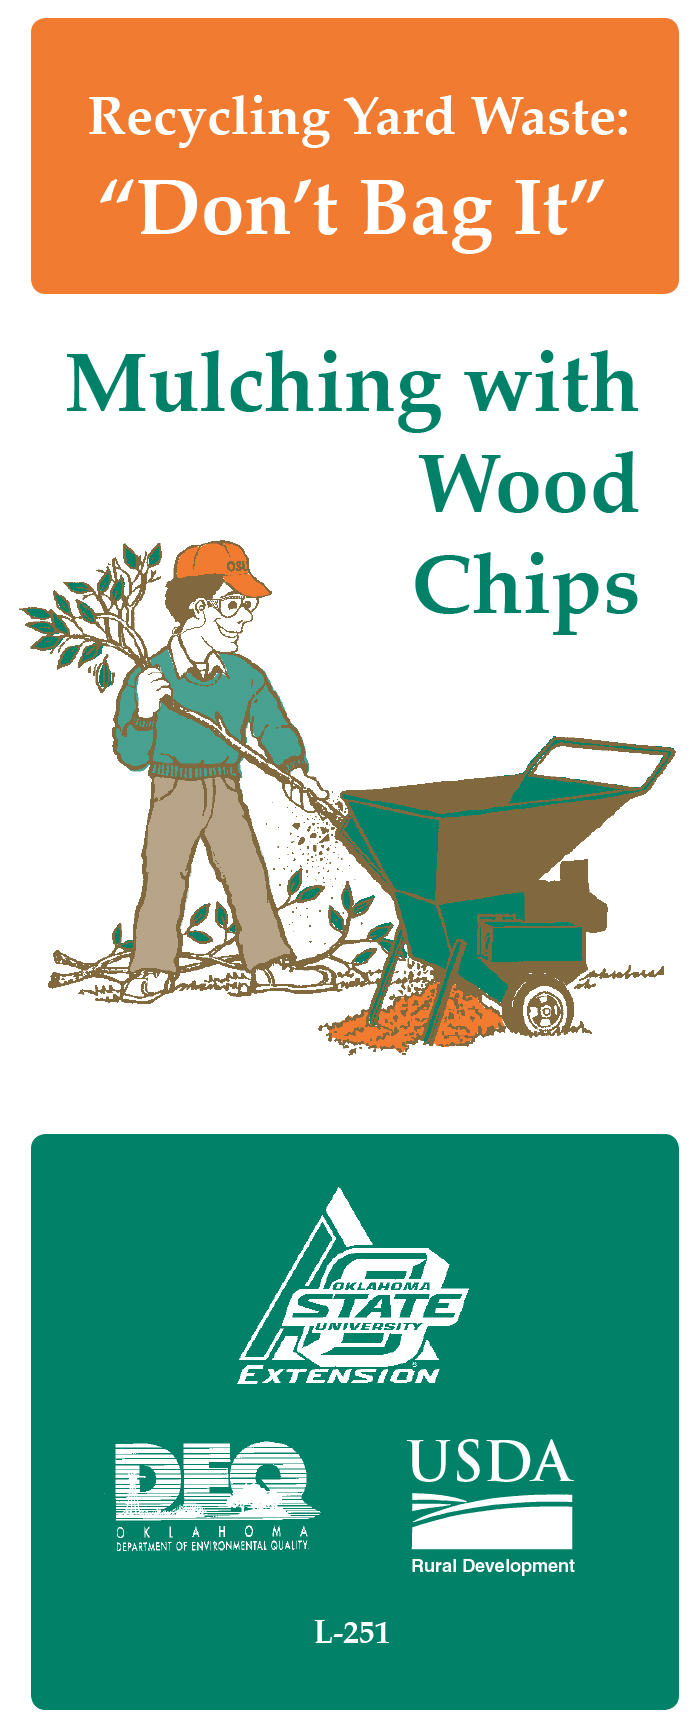 Recycling yard waste:  Don't bag it! Mulching with wood chips.